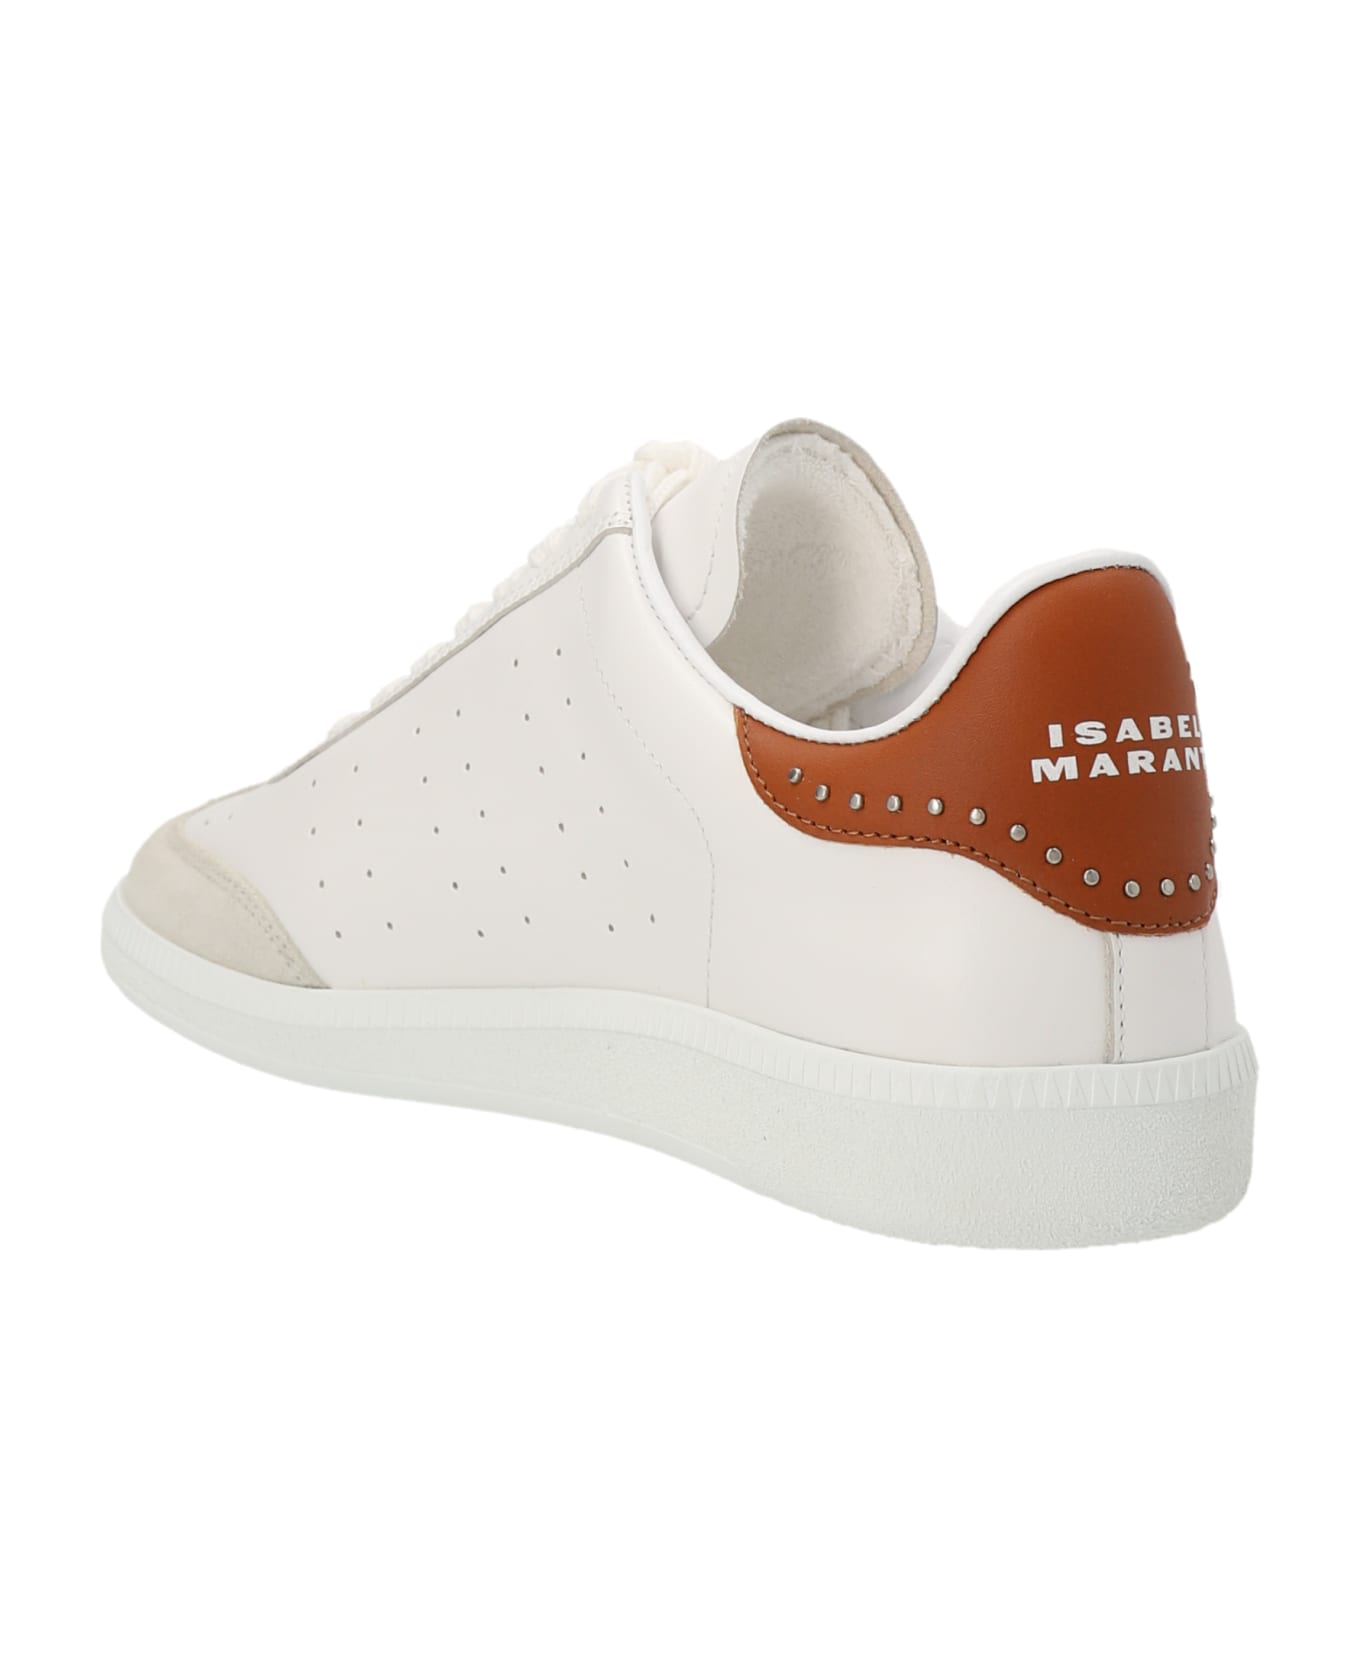 Isabel Marant Bryce Leather Sneakers - Leather Brown スニーカー